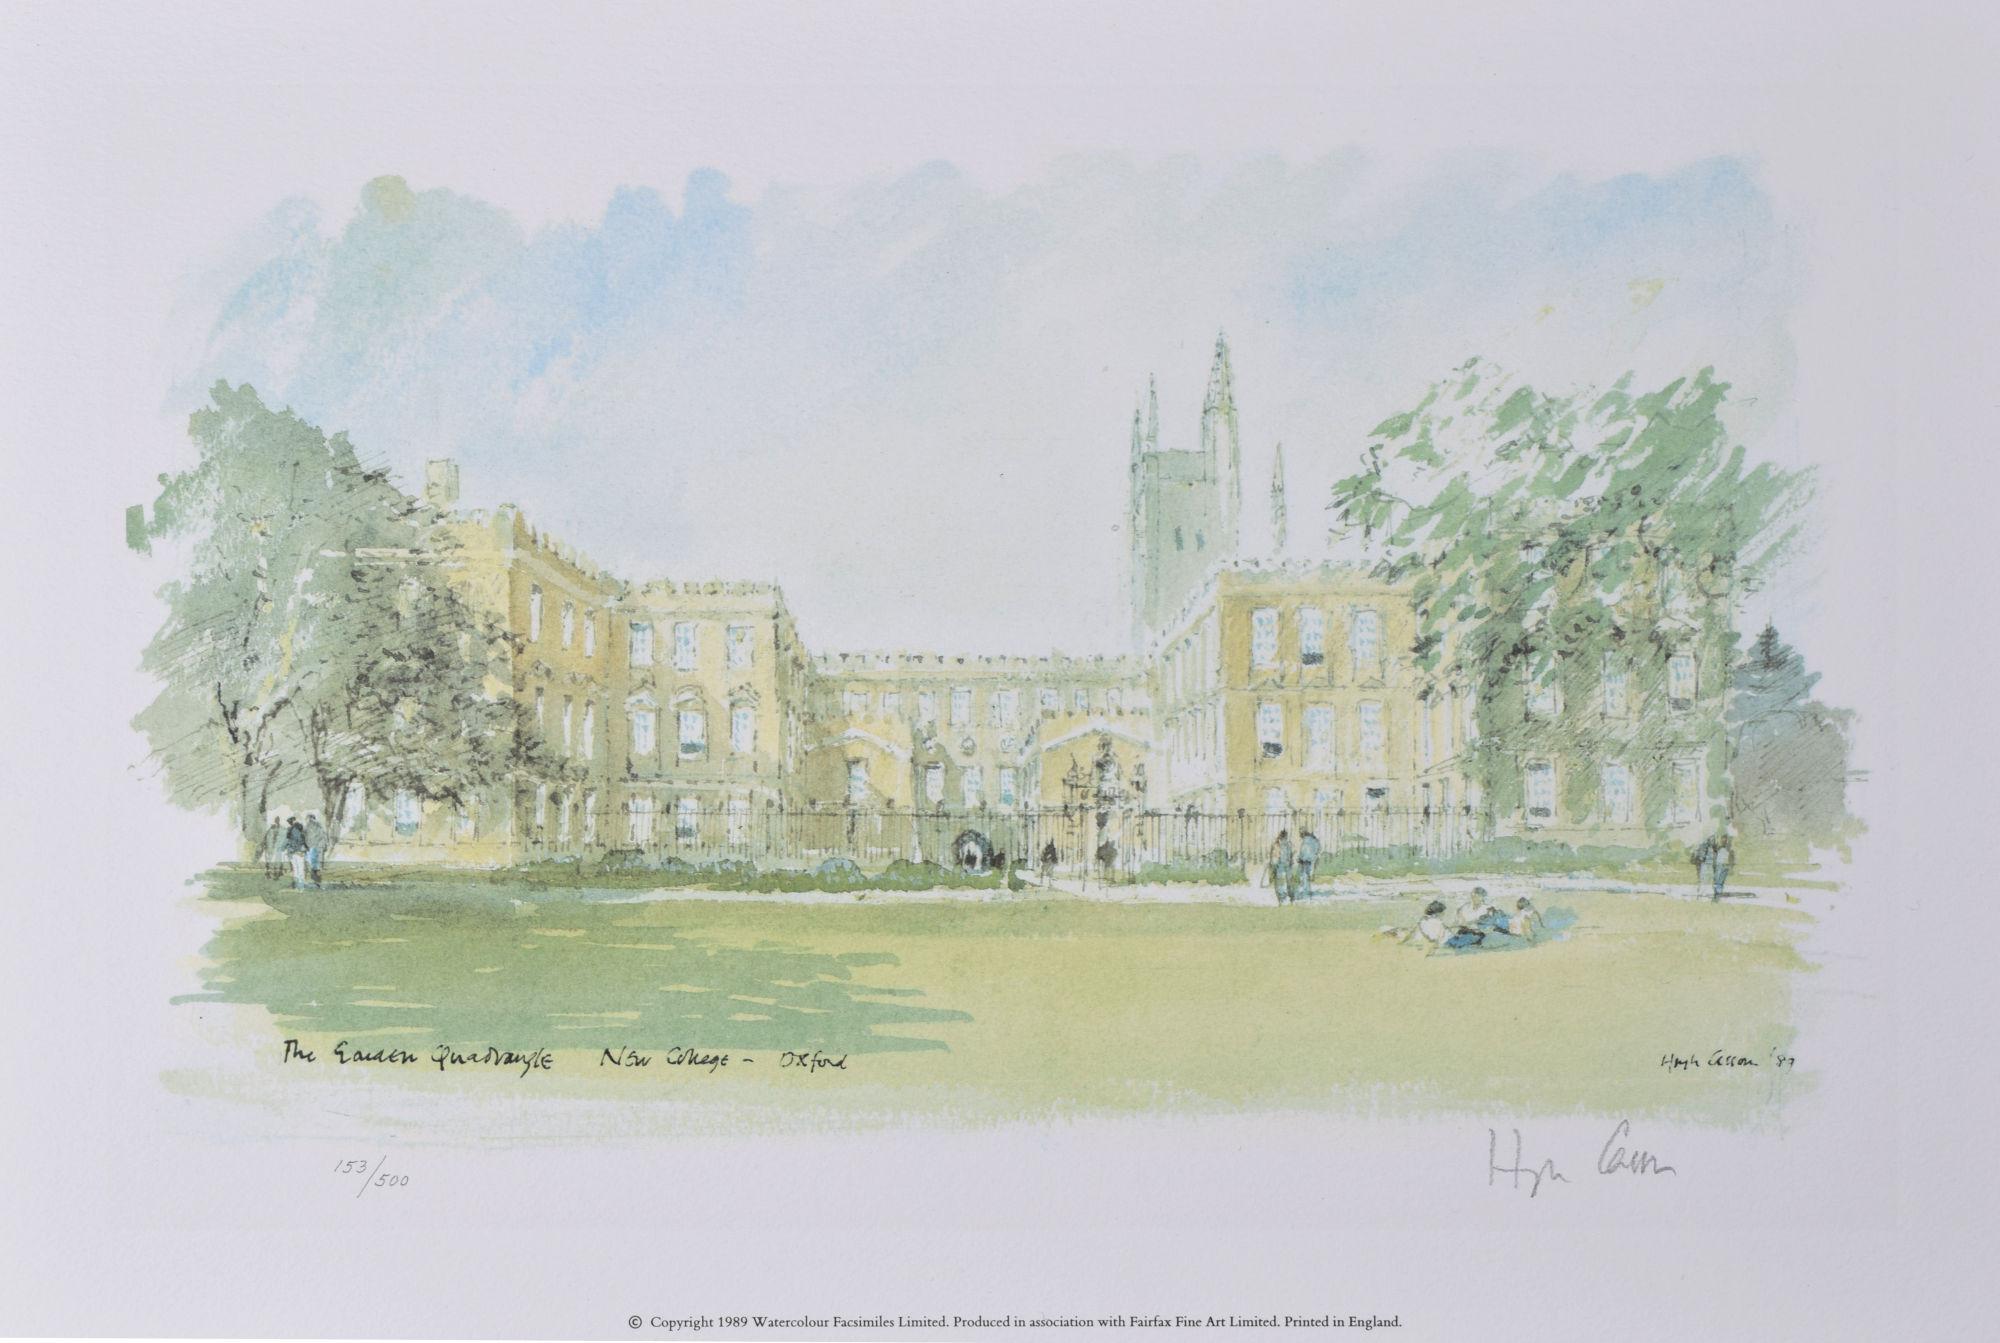 To see our other views of Oxford and Cambridge, scroll down to "More from this Seller" and below it click on "See all from this seller" - or send us a message if you cannot find the view you want.

Hugh Casson (1910 - 1999)
The Garden Quadrangle,